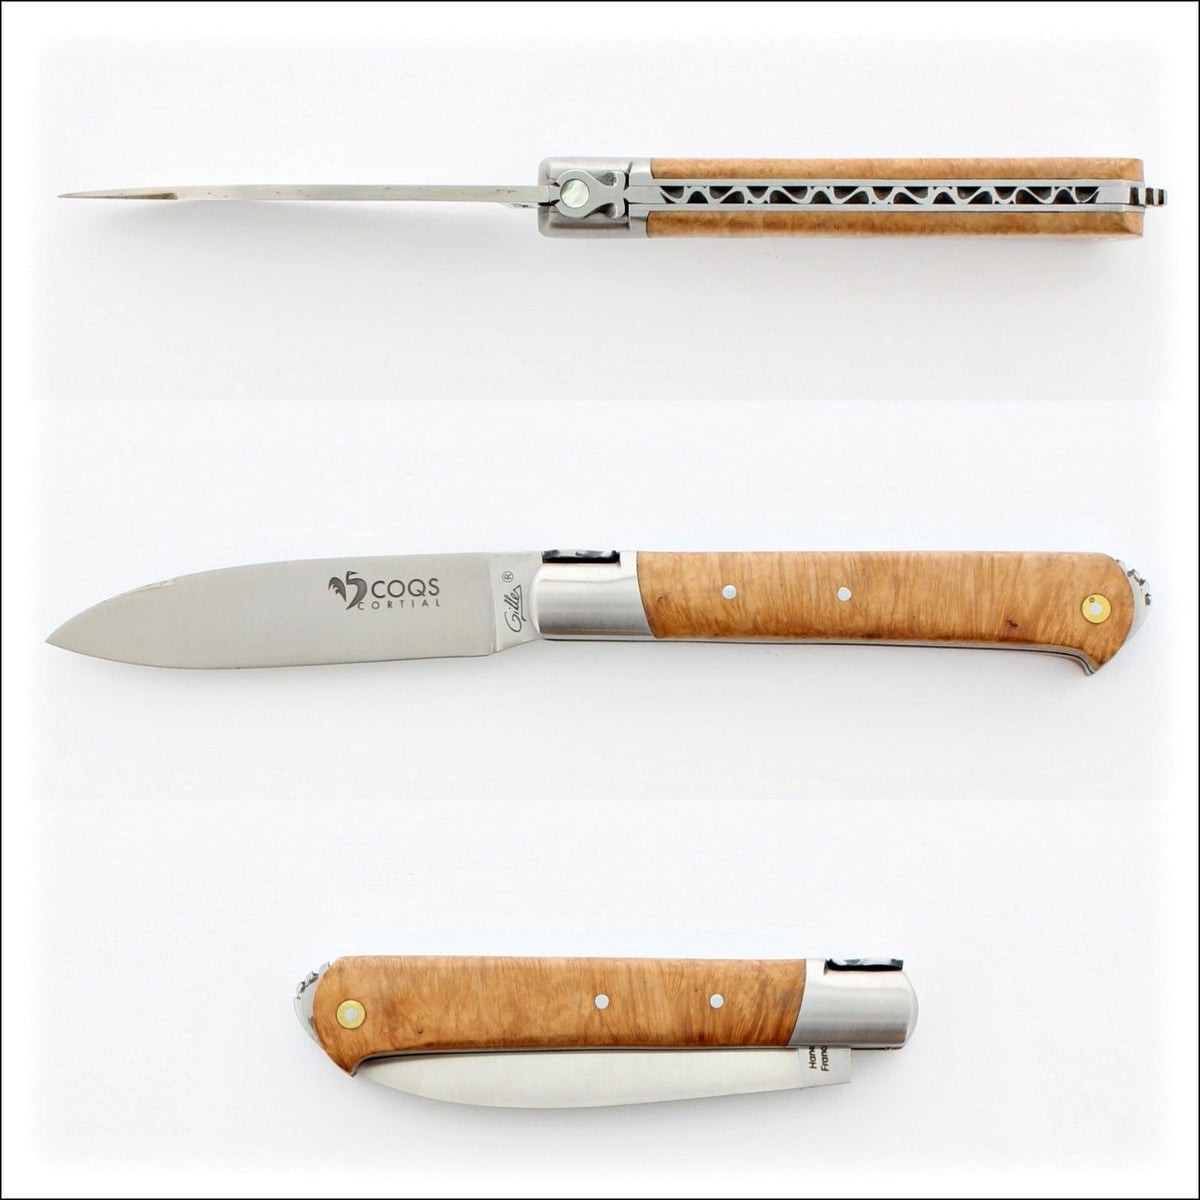 5 Coqs Pocket Knife - Briarwood &amp; Mother of Pearl Inlay